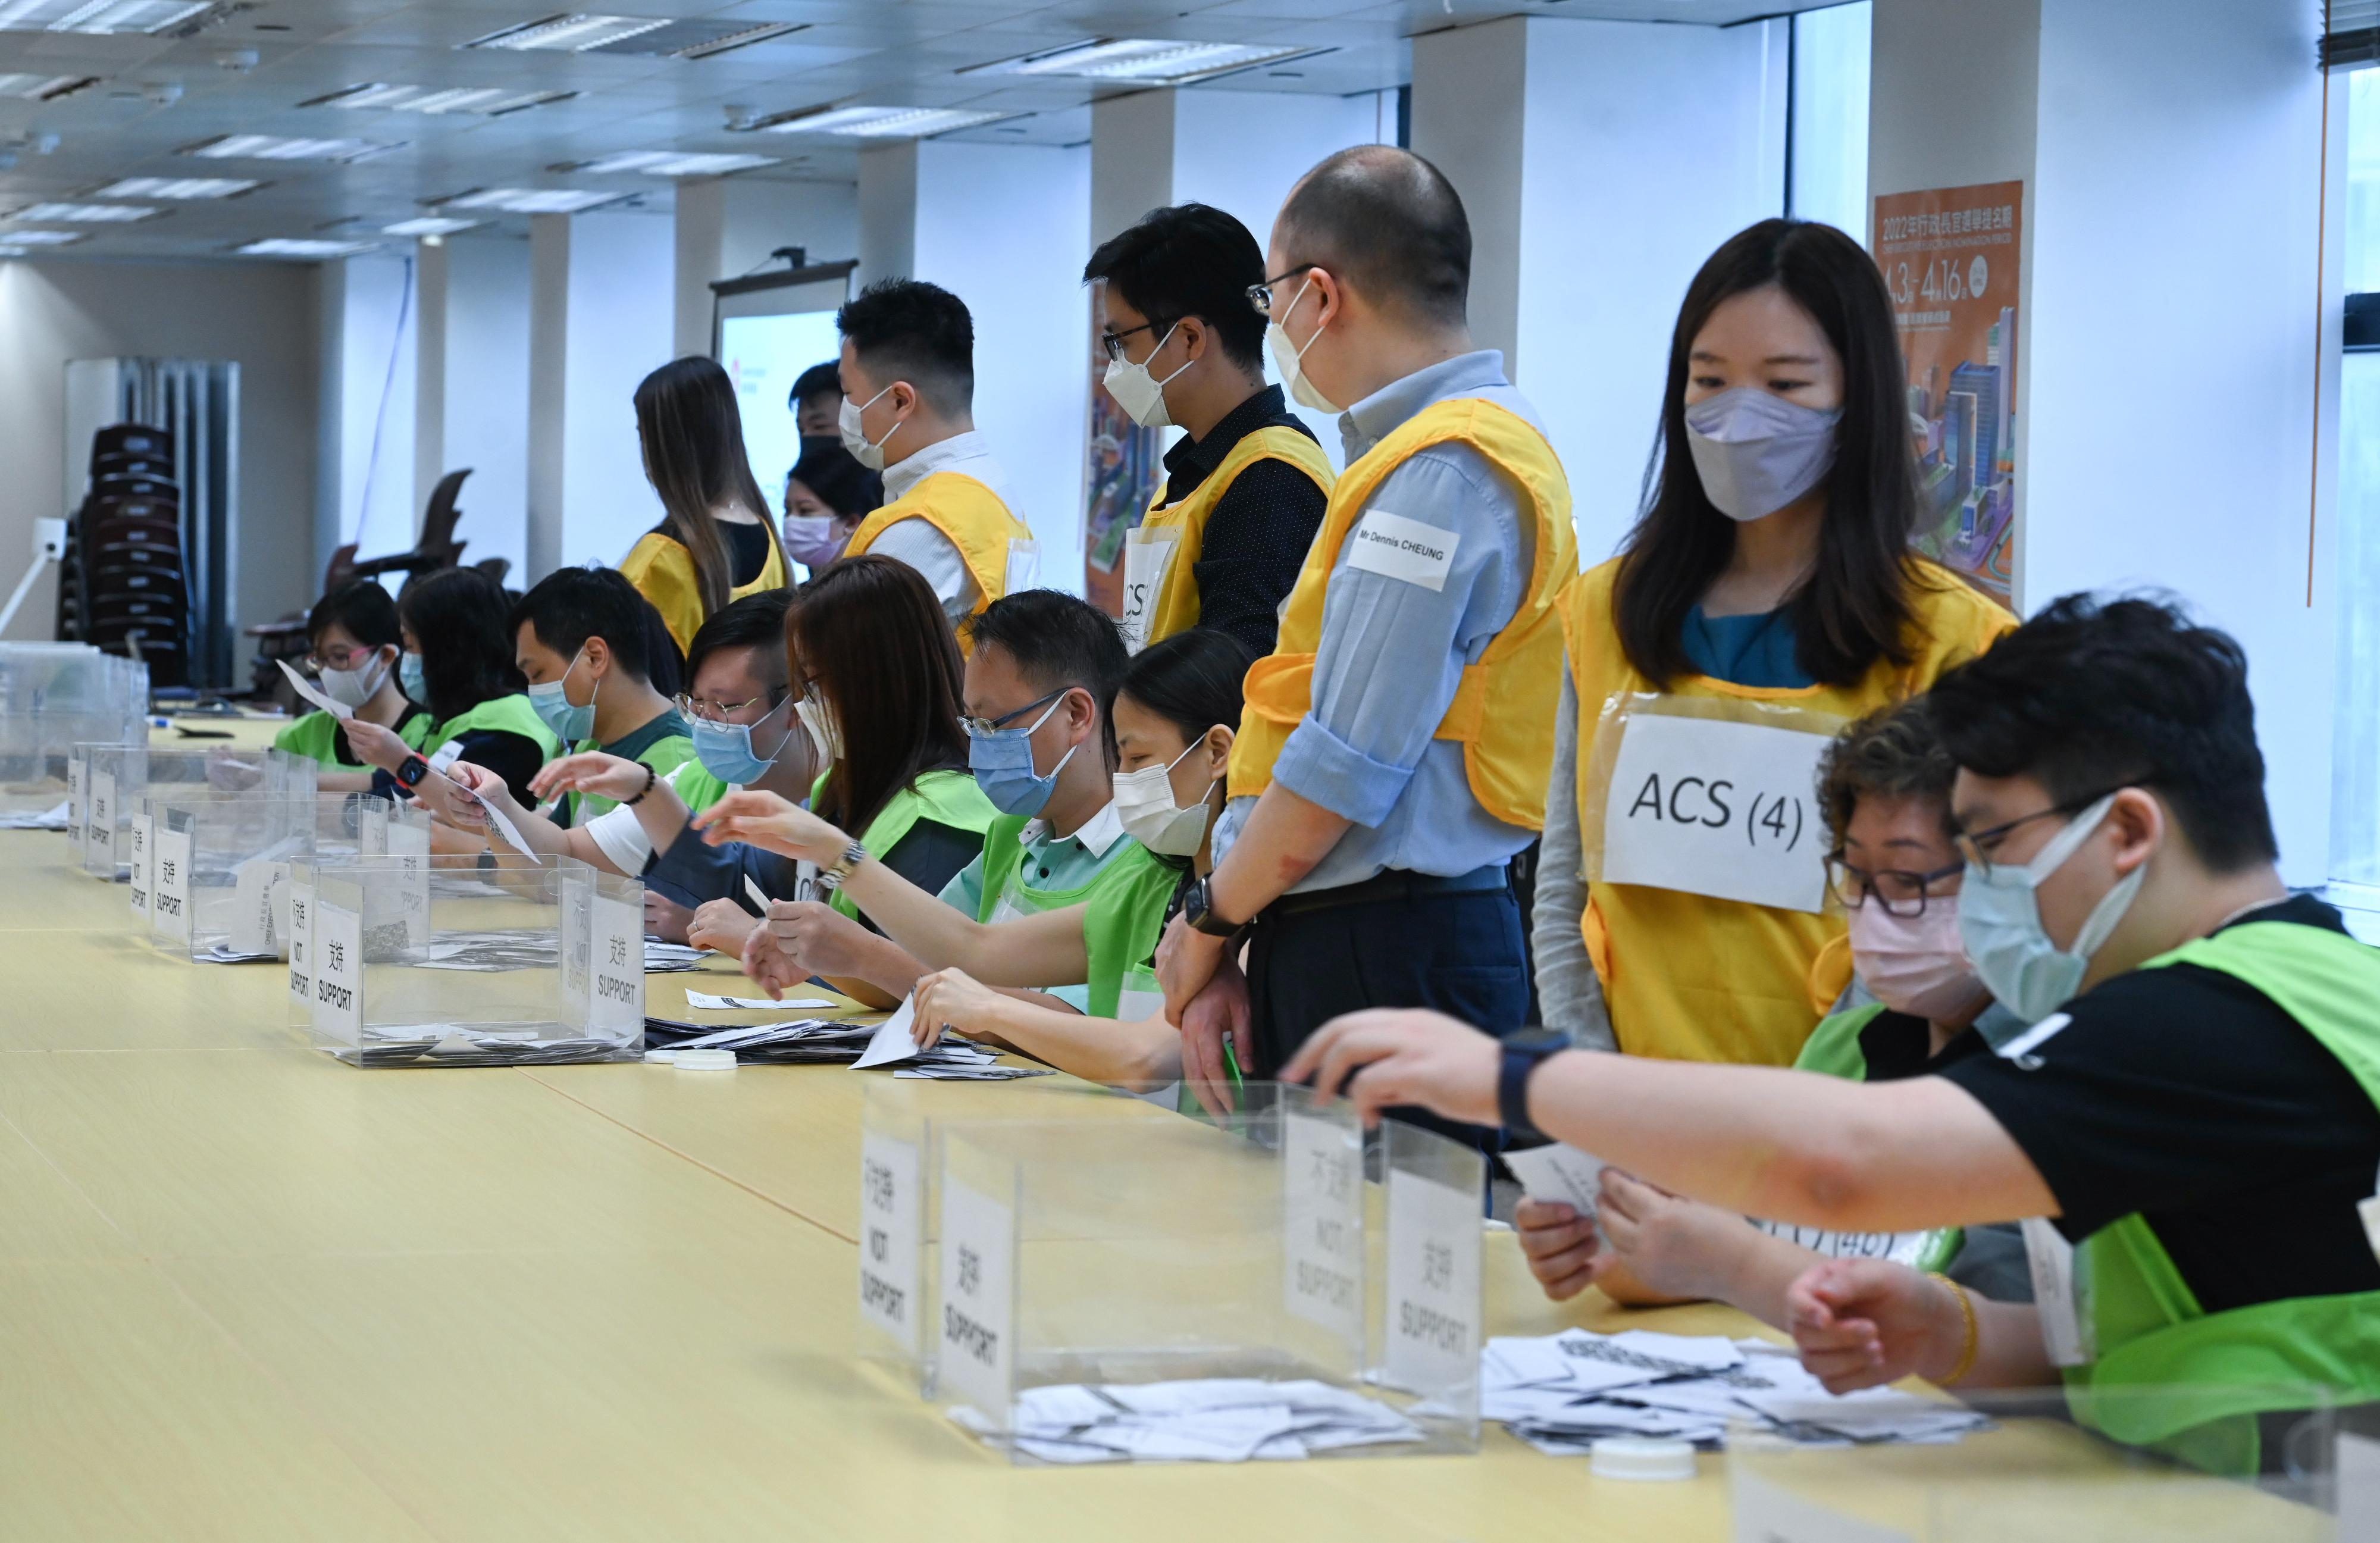 The 2022 Chief Executive Election will be held on May 8. The Registration and Electoral Office arranged, over the past few days, online and hands-on training sessions for electoral staff who will work in the main polling station and the central counting station. Photo shows counting staff in a simulation of sorting ballot papers.